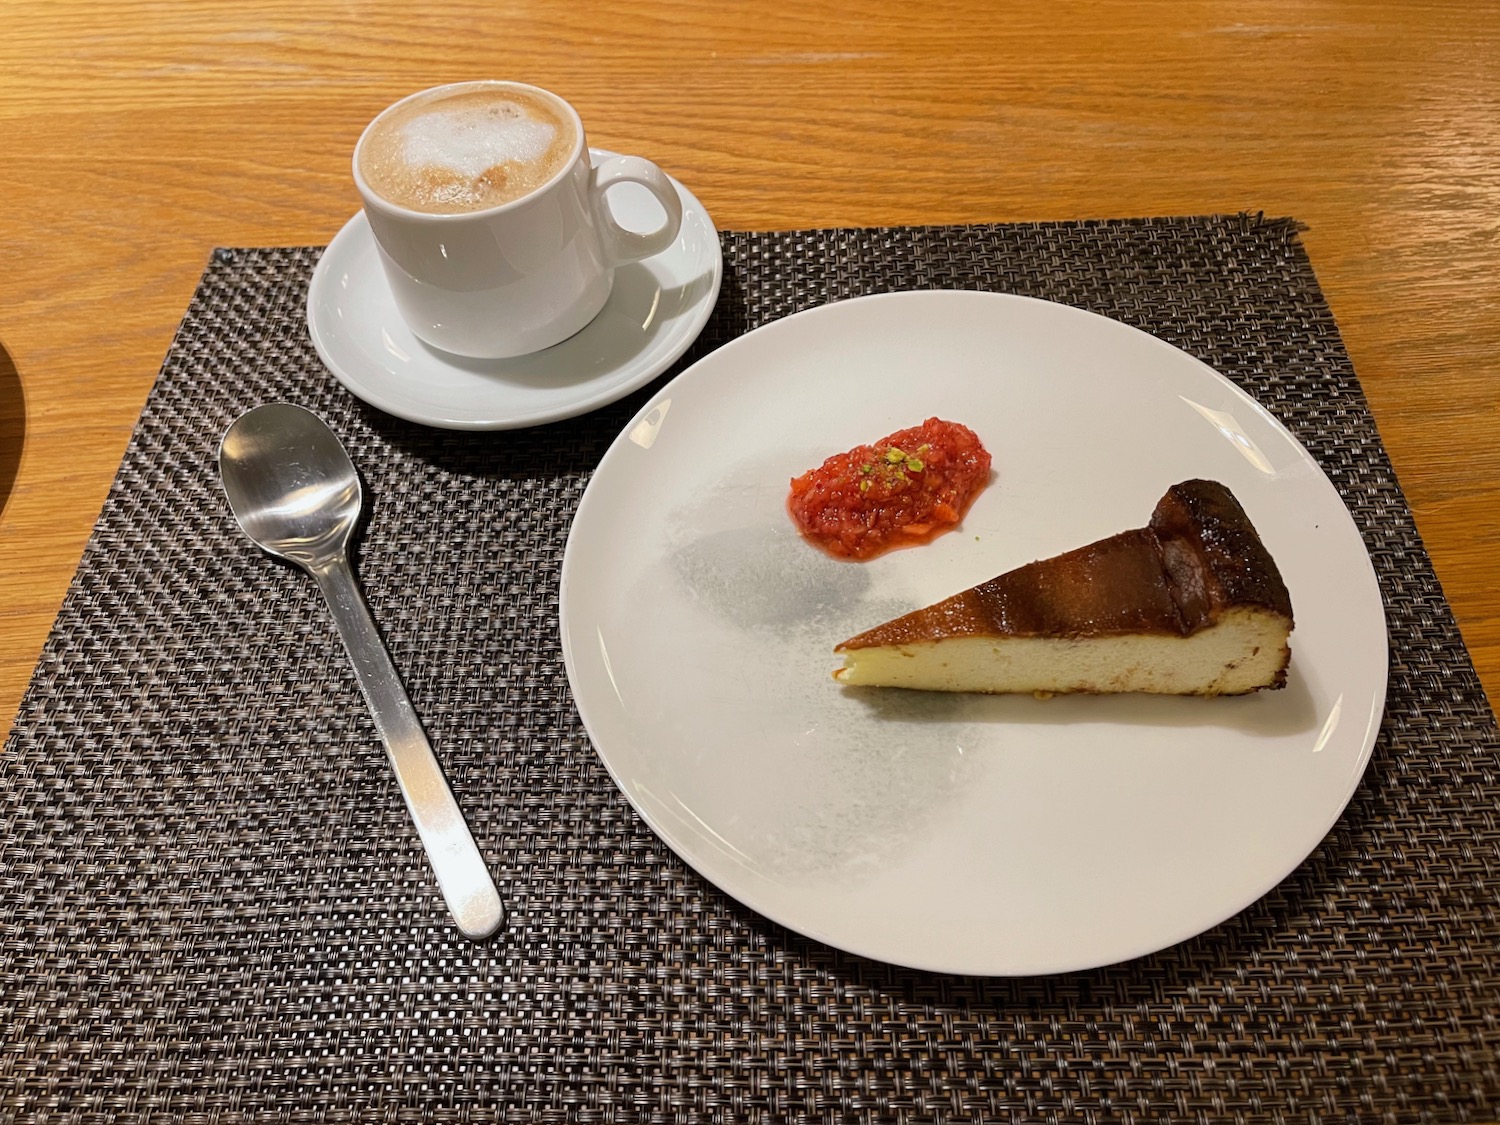 a plate with a slice of cake and a cup of coffee